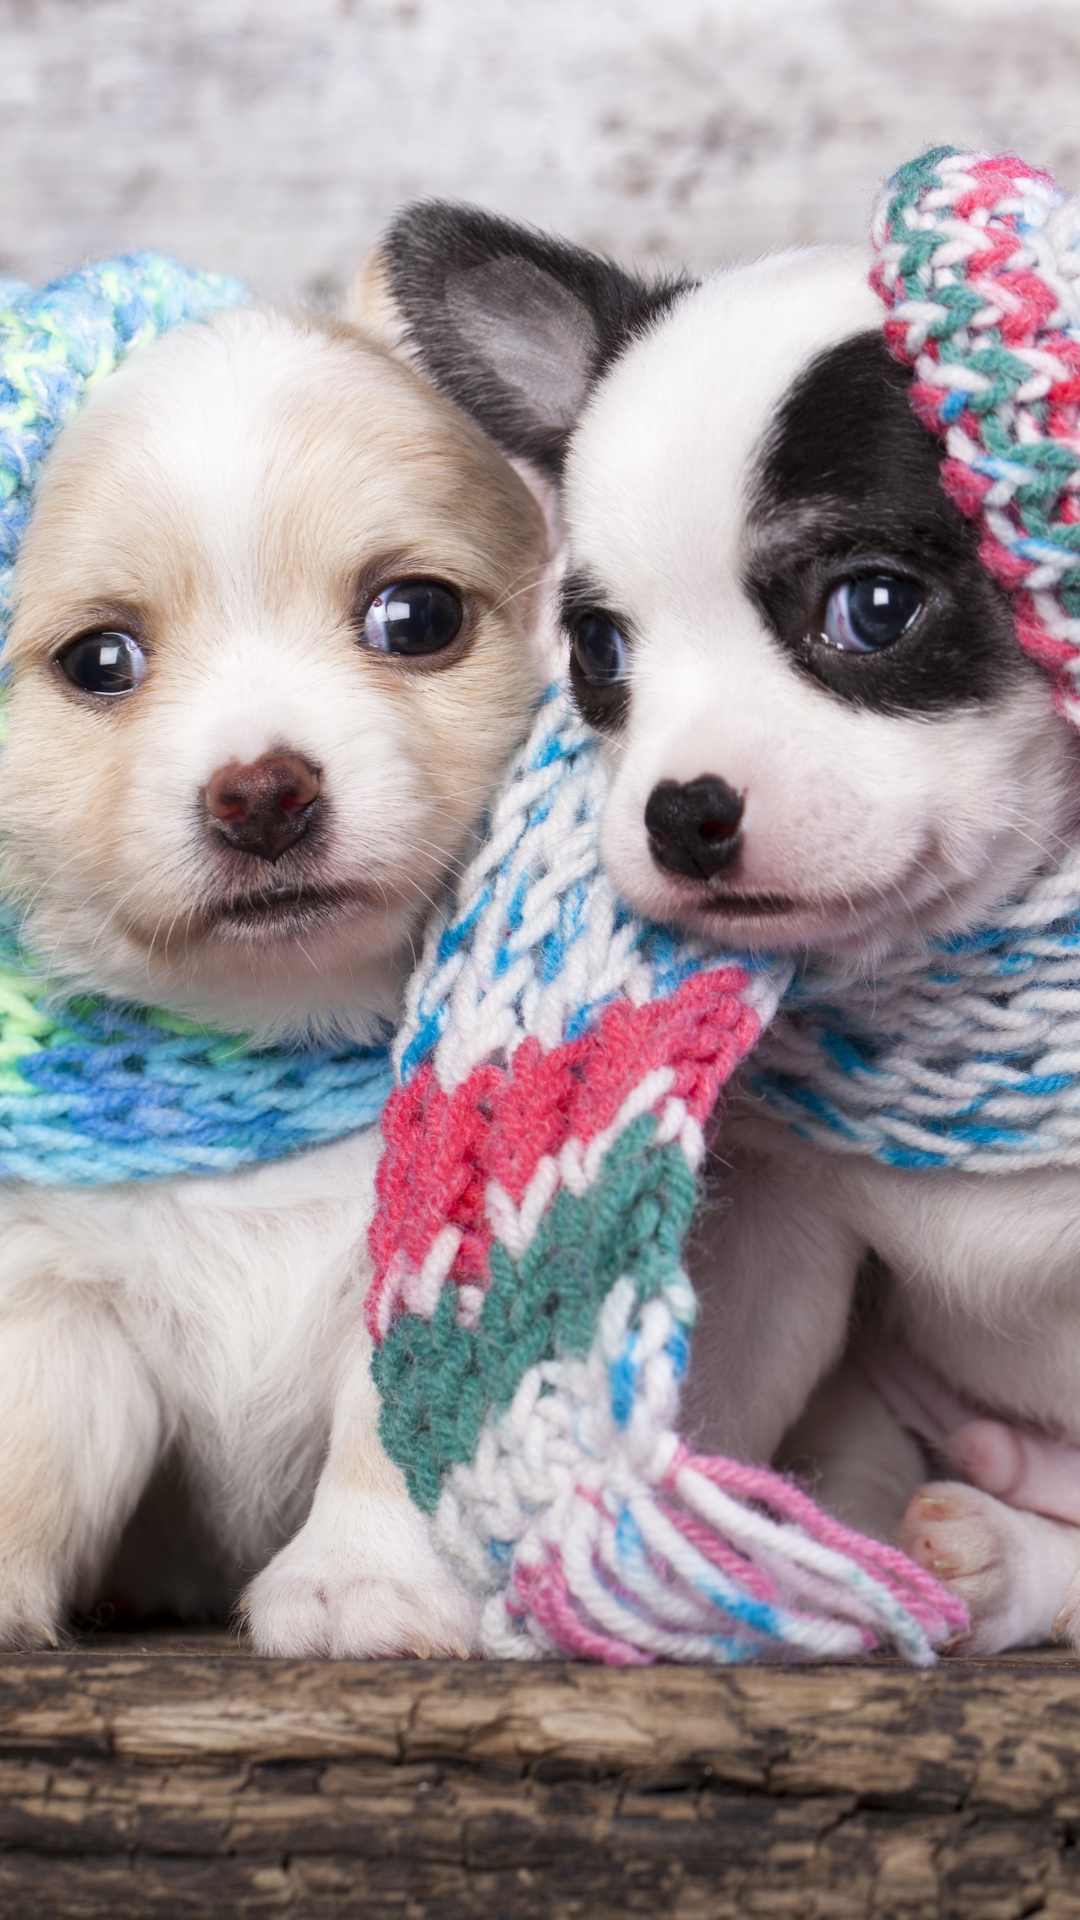 Cute Scarf Puppy Dog Couple iPhone 6 wallpaper